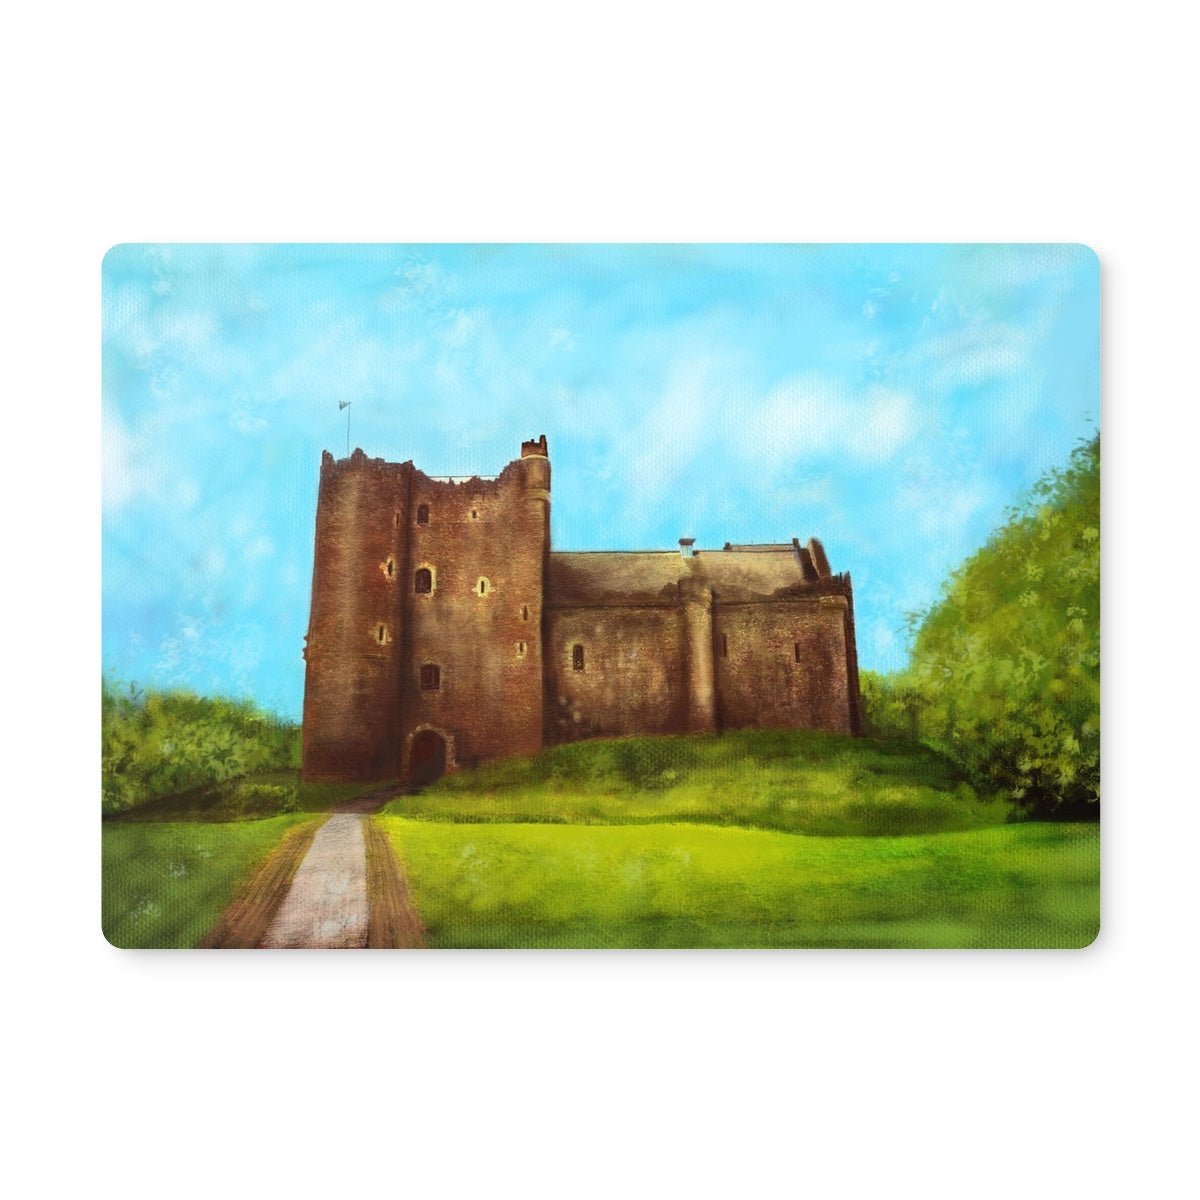 Doune Castle Art Gifts Placemat-Placemats-Historic & Iconic Scotland Art Gallery-Single Placemat-Paintings, Prints, Homeware, Art Gifts From Scotland By Scottish Artist Kevin Hunter